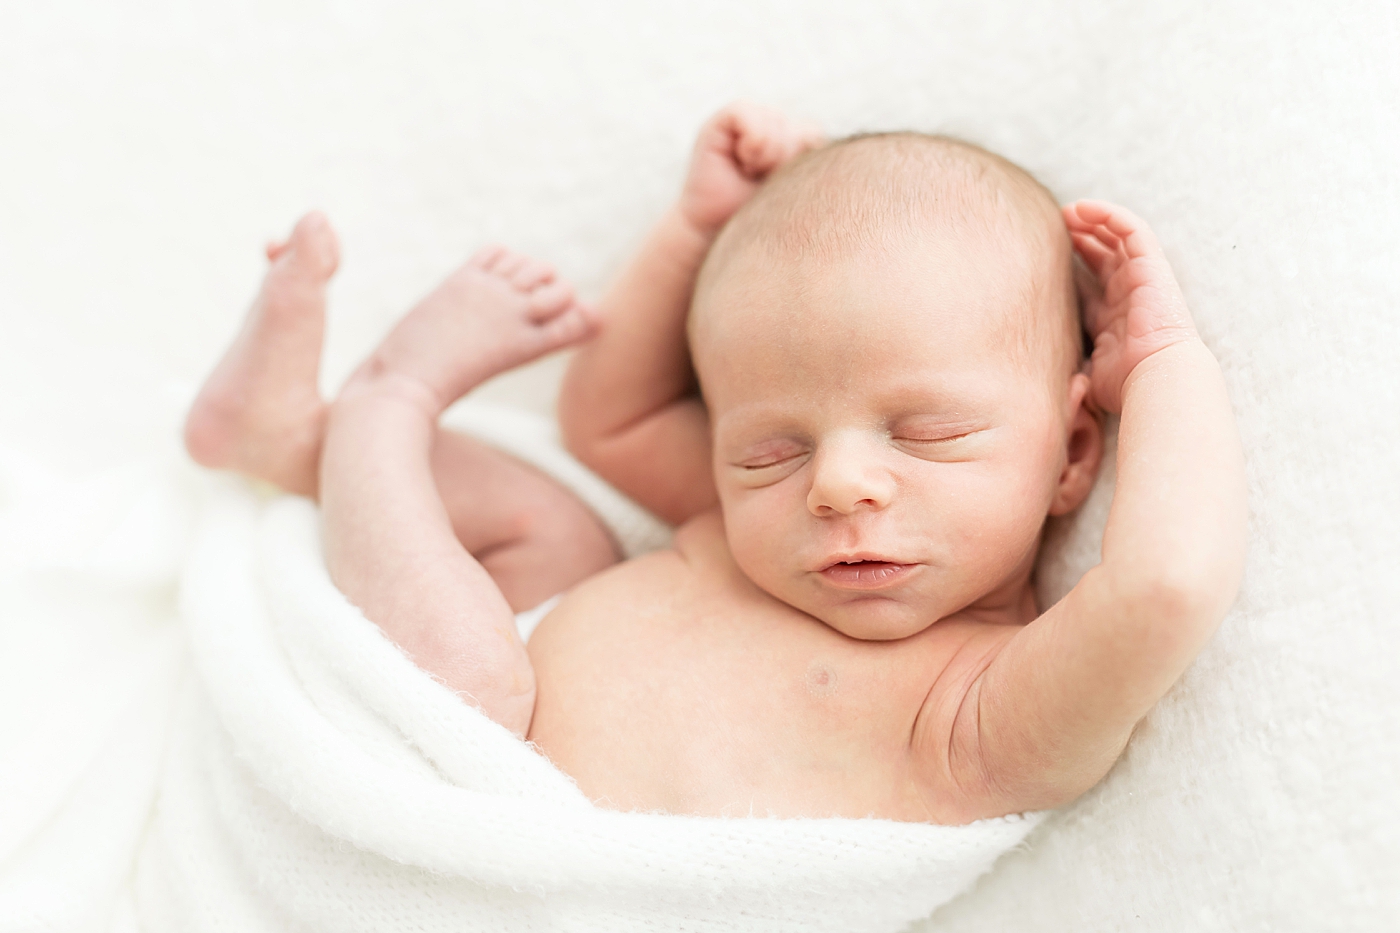 Newborn baby boy curled up on a white blanket for newborn photos with Fresh Light Photography.